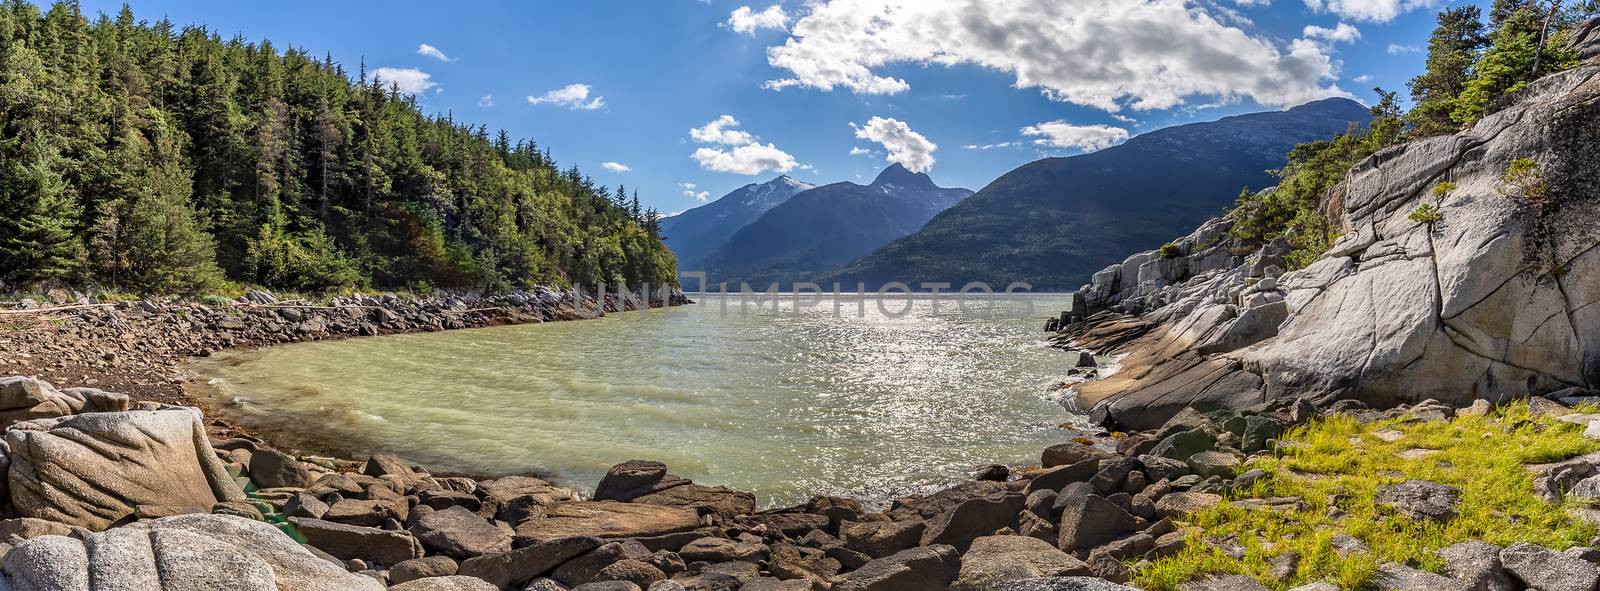 Beautiful panoramic view of Smuggler's Cove in Alaska. Mountains, forest, blue cloudy sky in the background. Rocky terrain in the foreground by DamantisZ